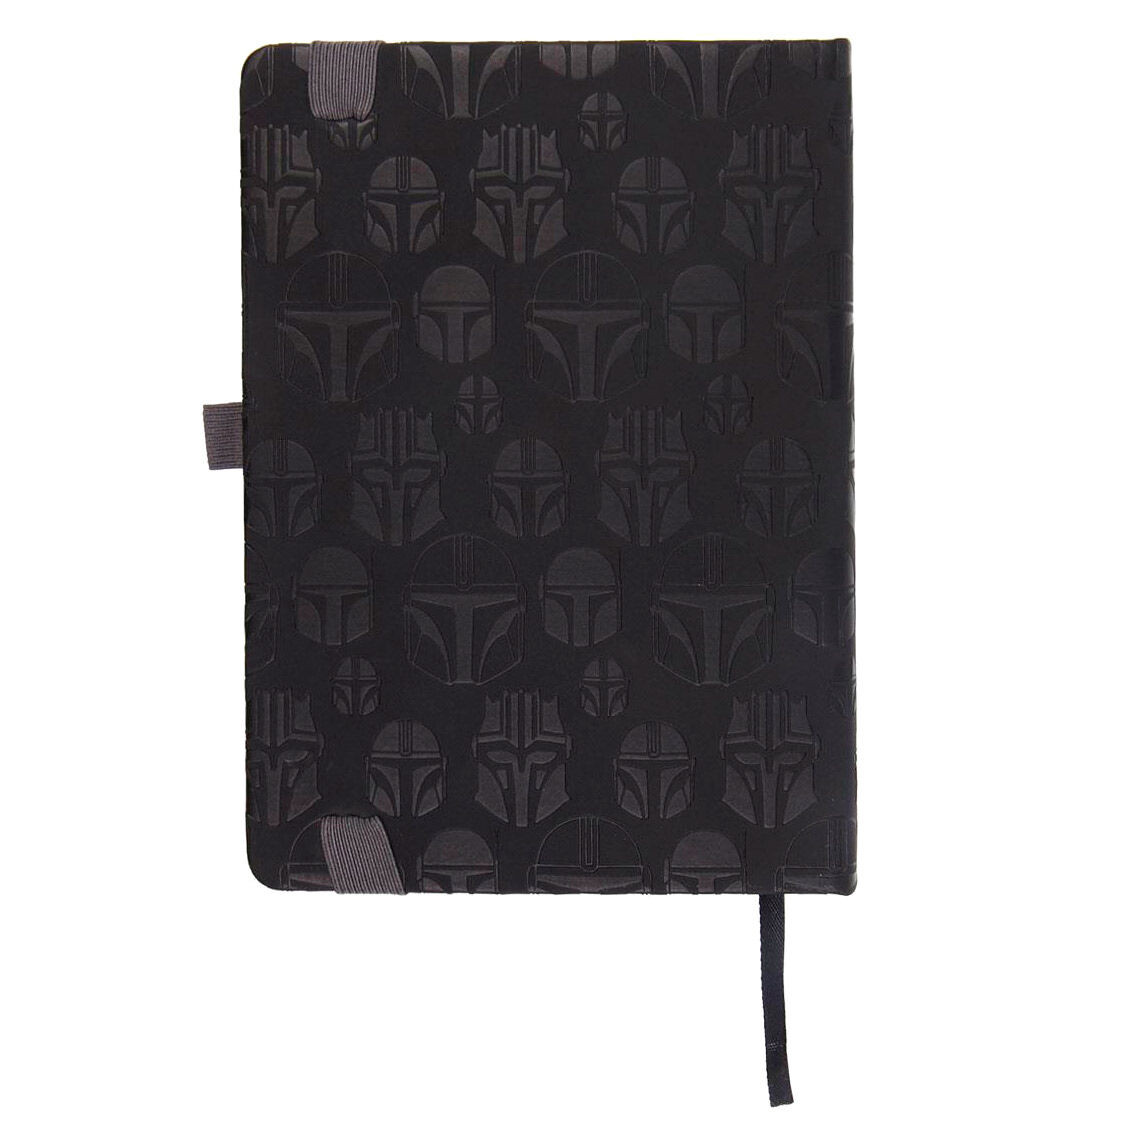 STARS WARS THE MANDALORIAN A5 FAUX-LEATHER NOTEBOOK CERDA - 4